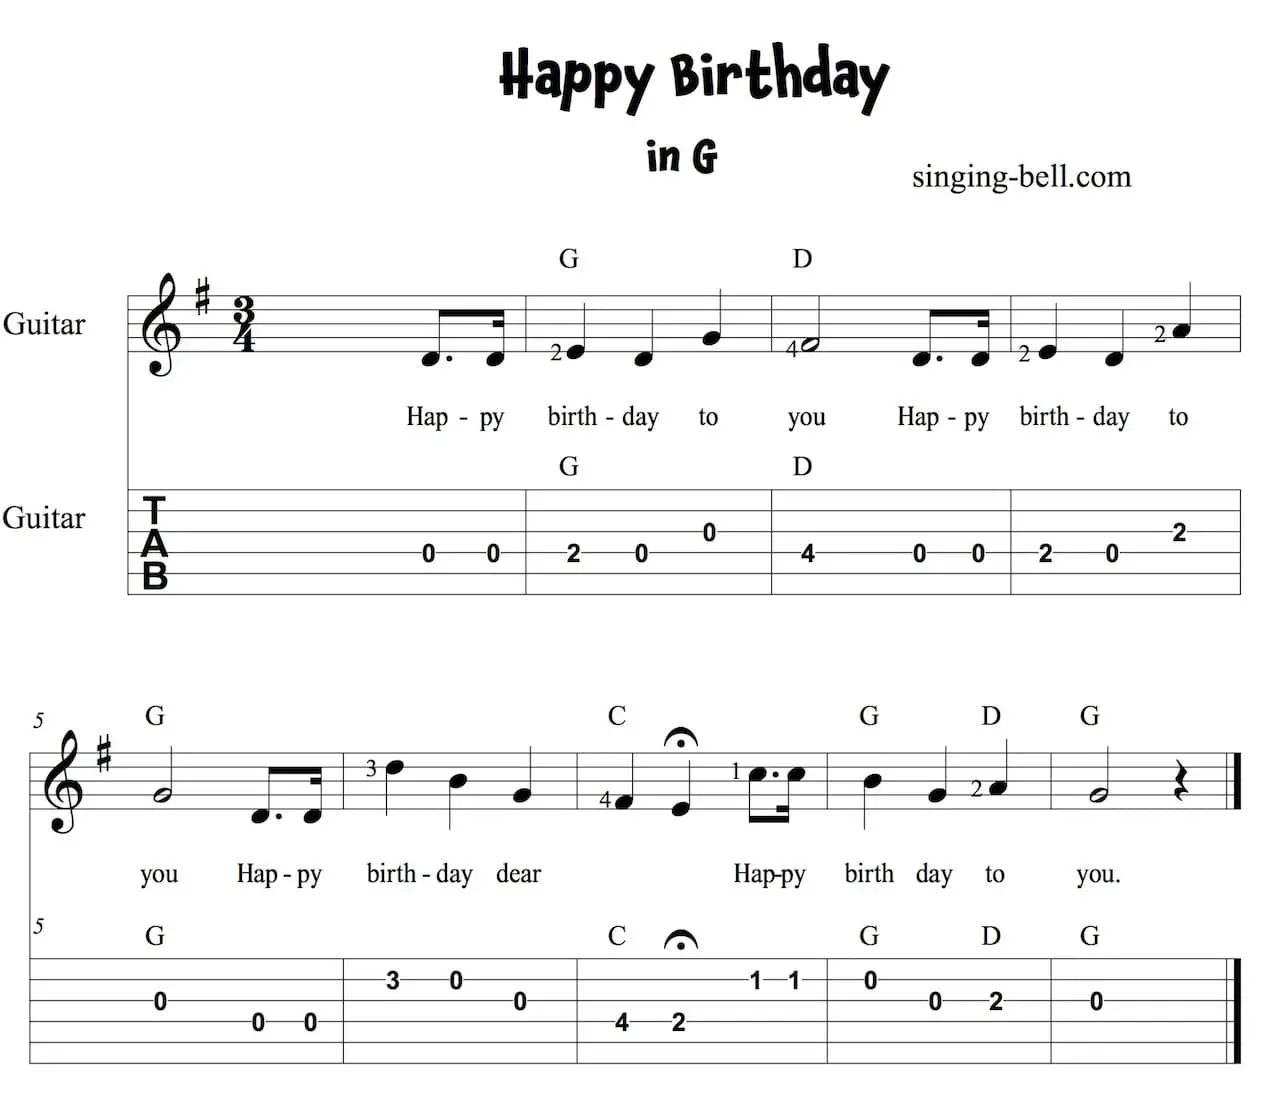 Happy Birthday Song - easy guitar sheet music with notes and Tabs in G.